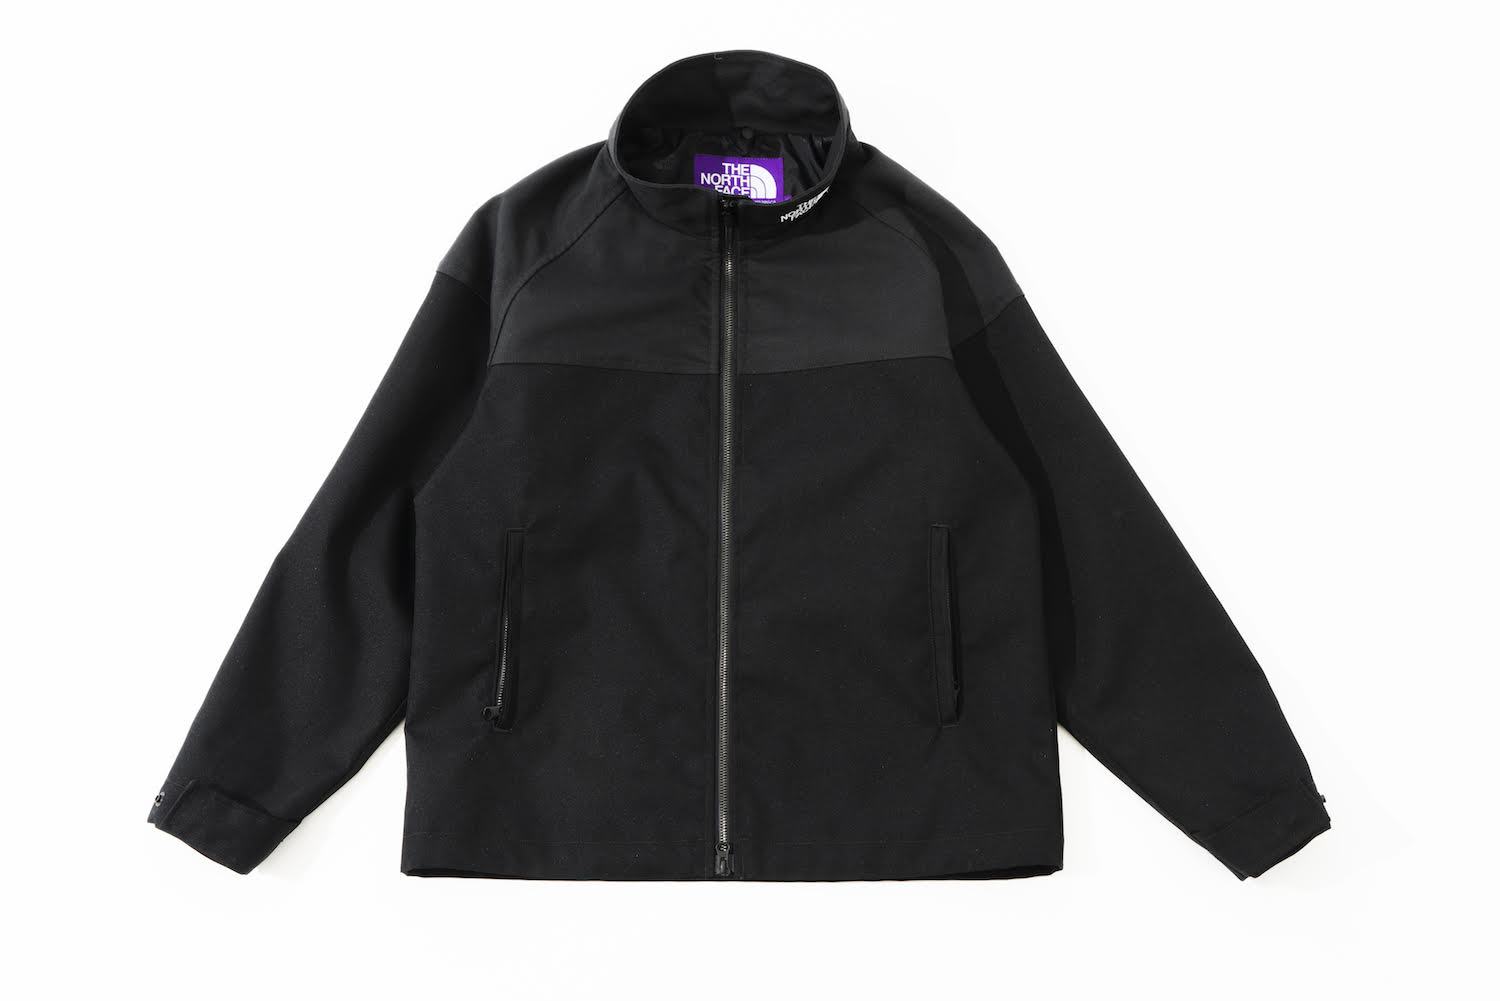 THE NORTH FACE PURPLE LABEL×RHC
Field Jacket